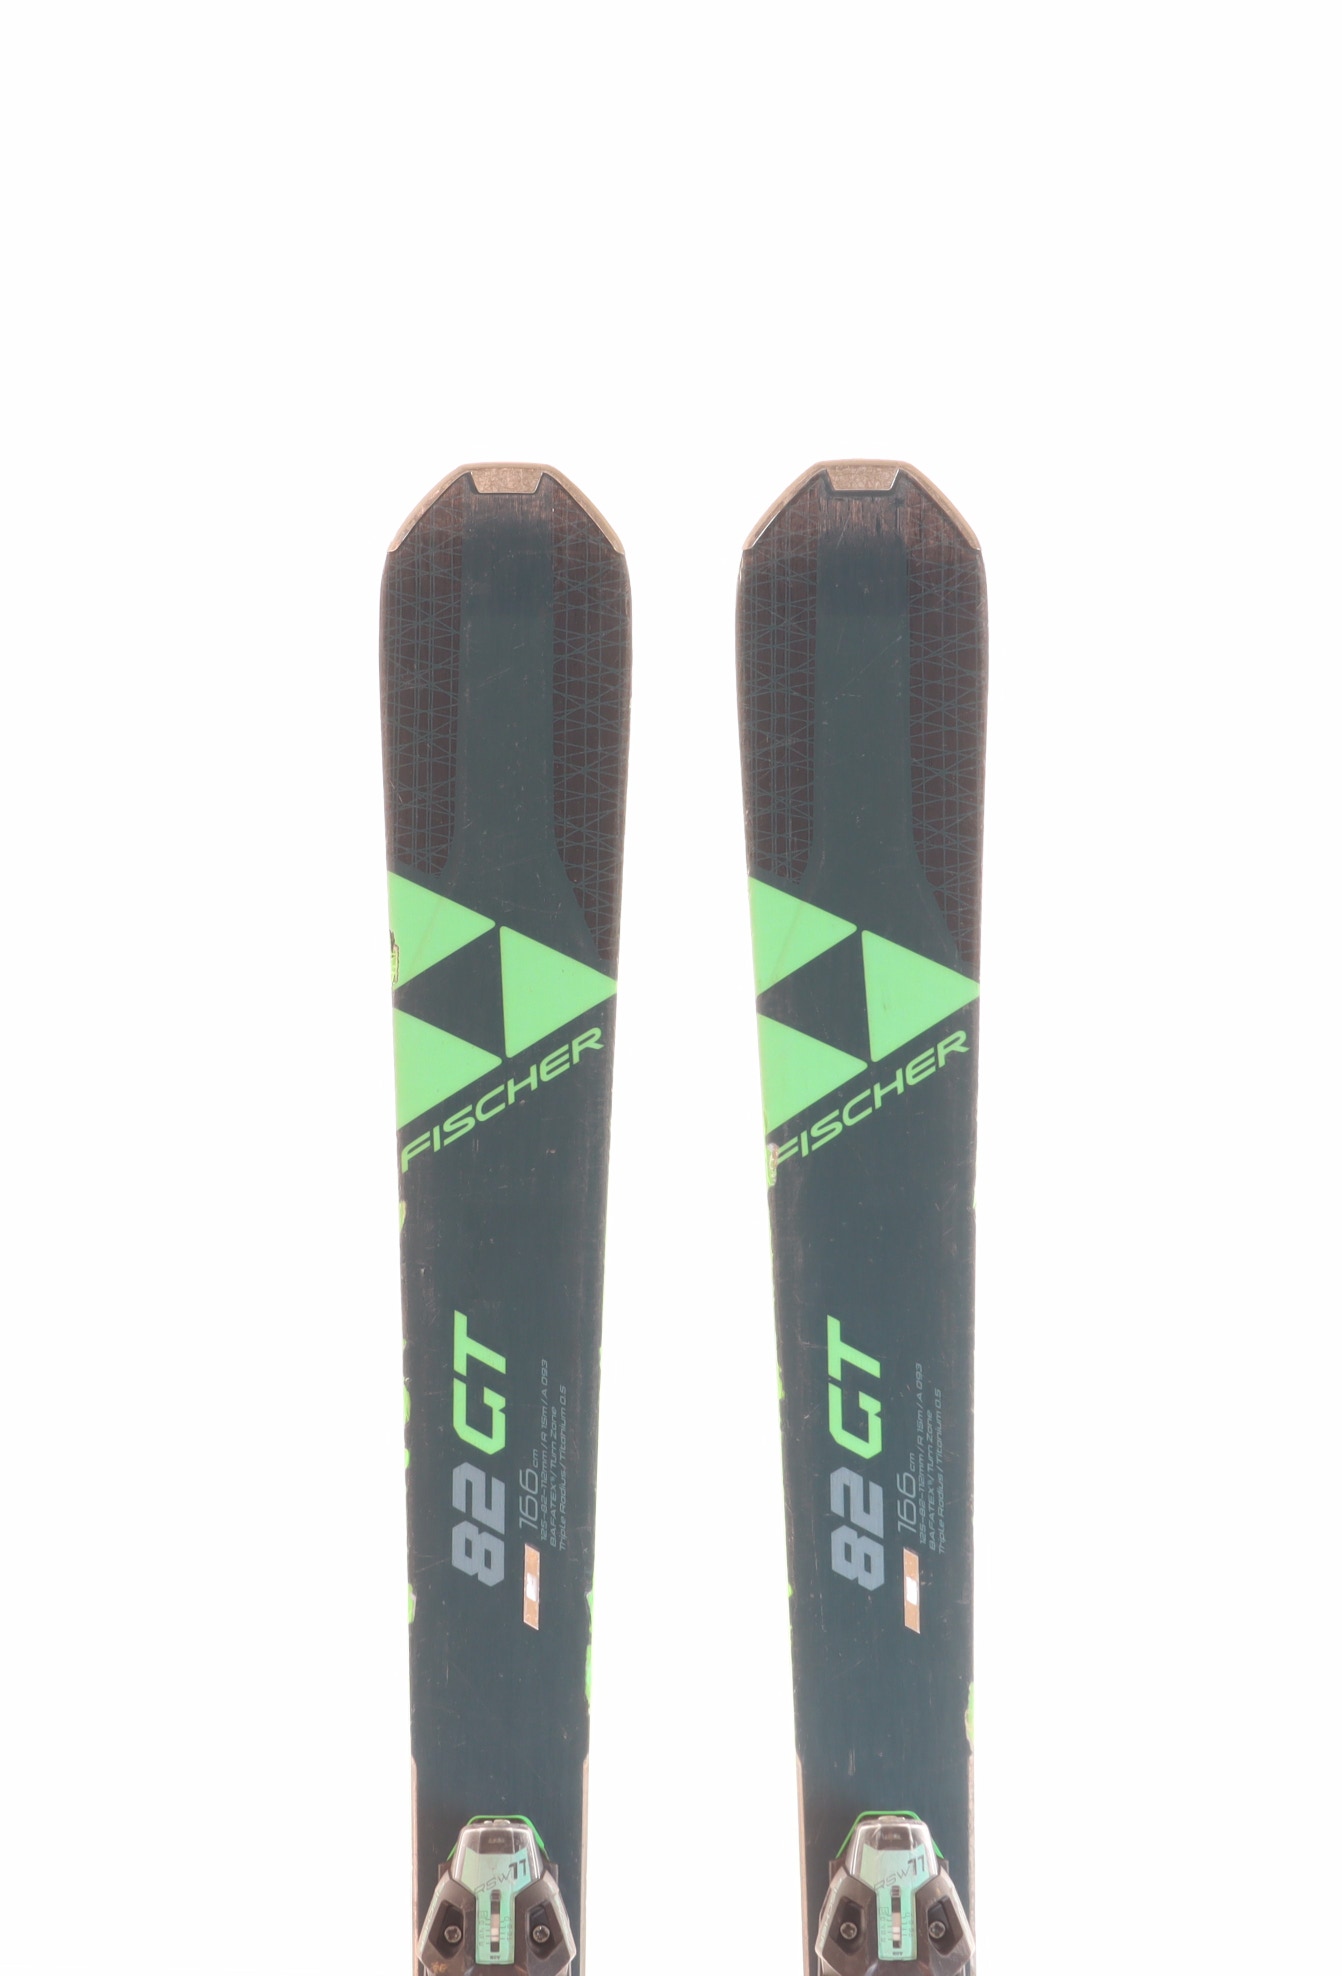 Used 2021 Fischer RC One 82 GT Skis with Marker TCX 11 Bindings Size 166 (Option 230921)